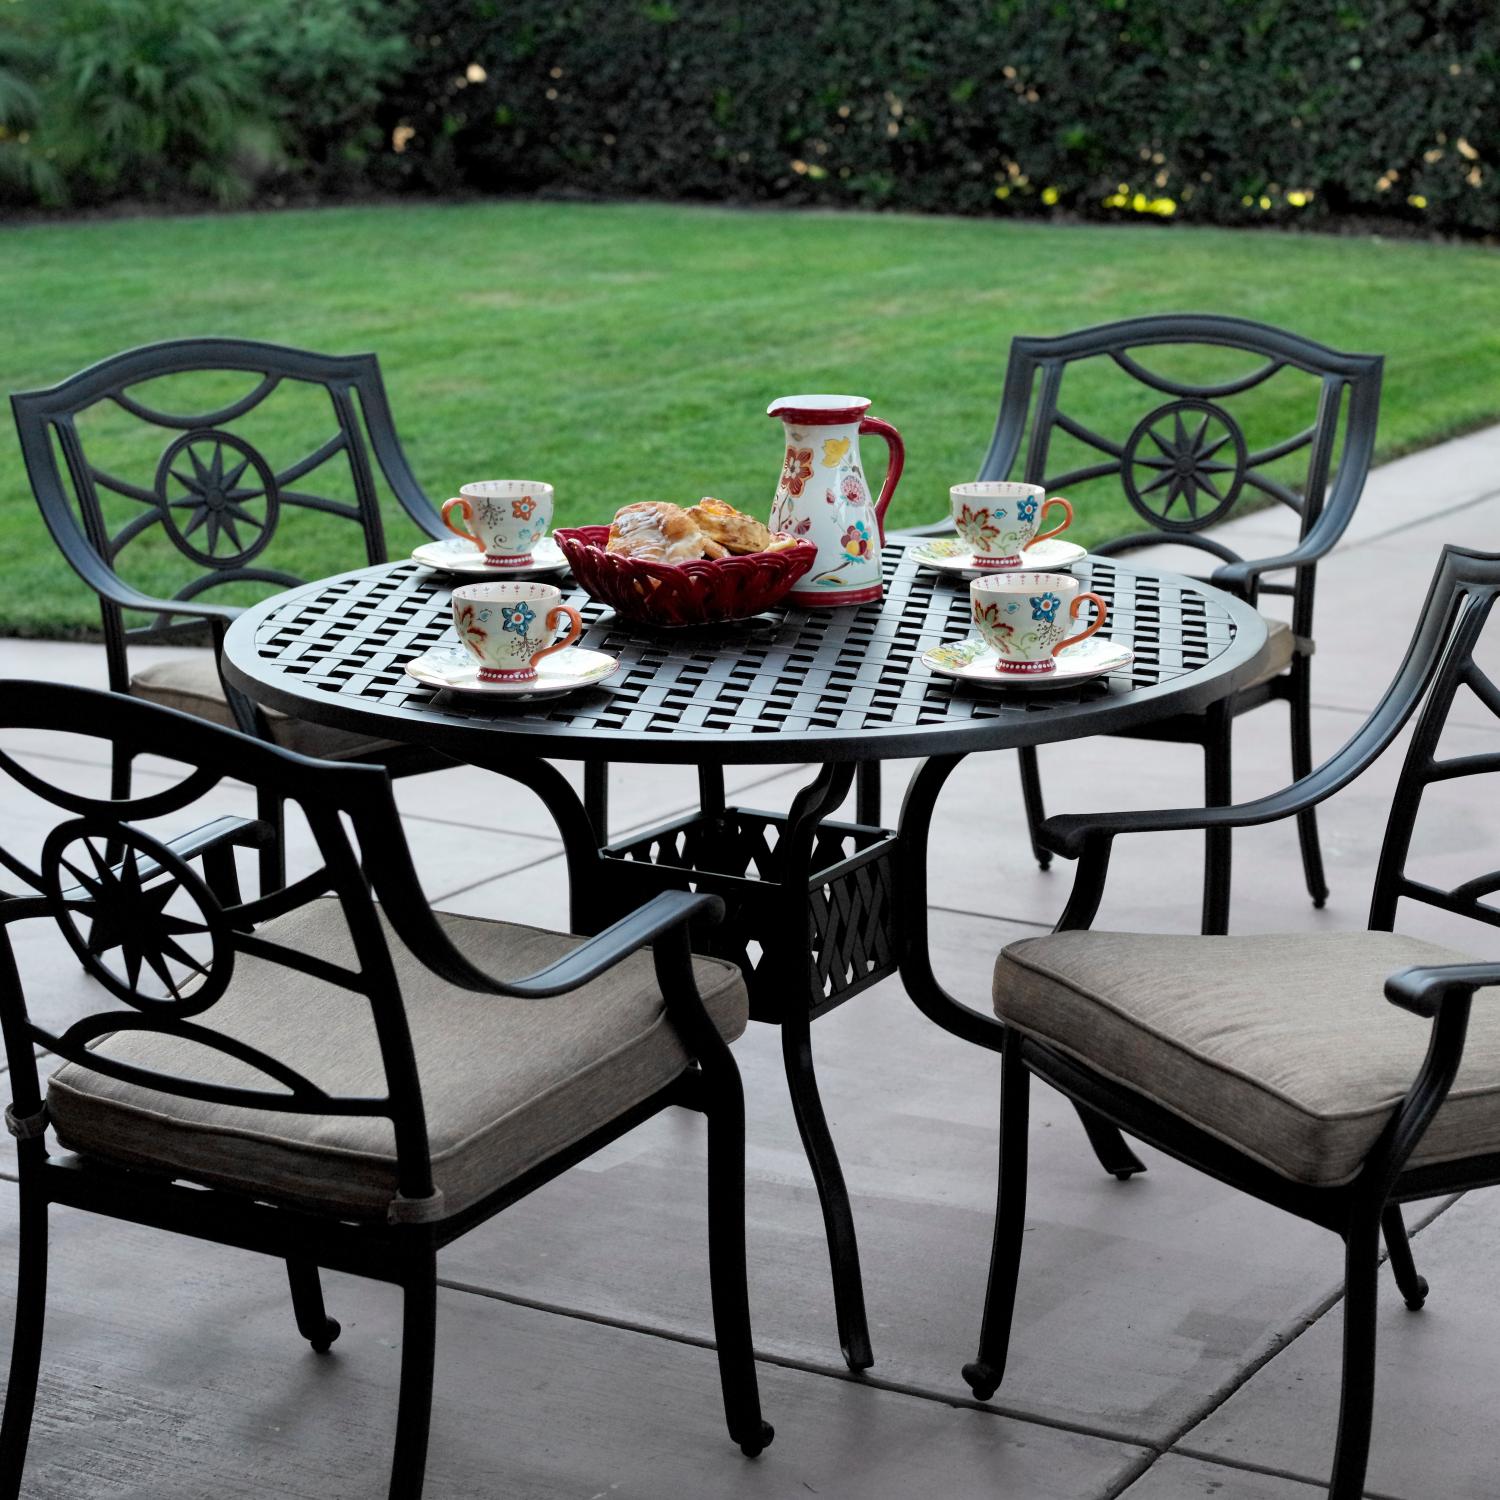 Patio dining sets for 10 | Hawk Haven